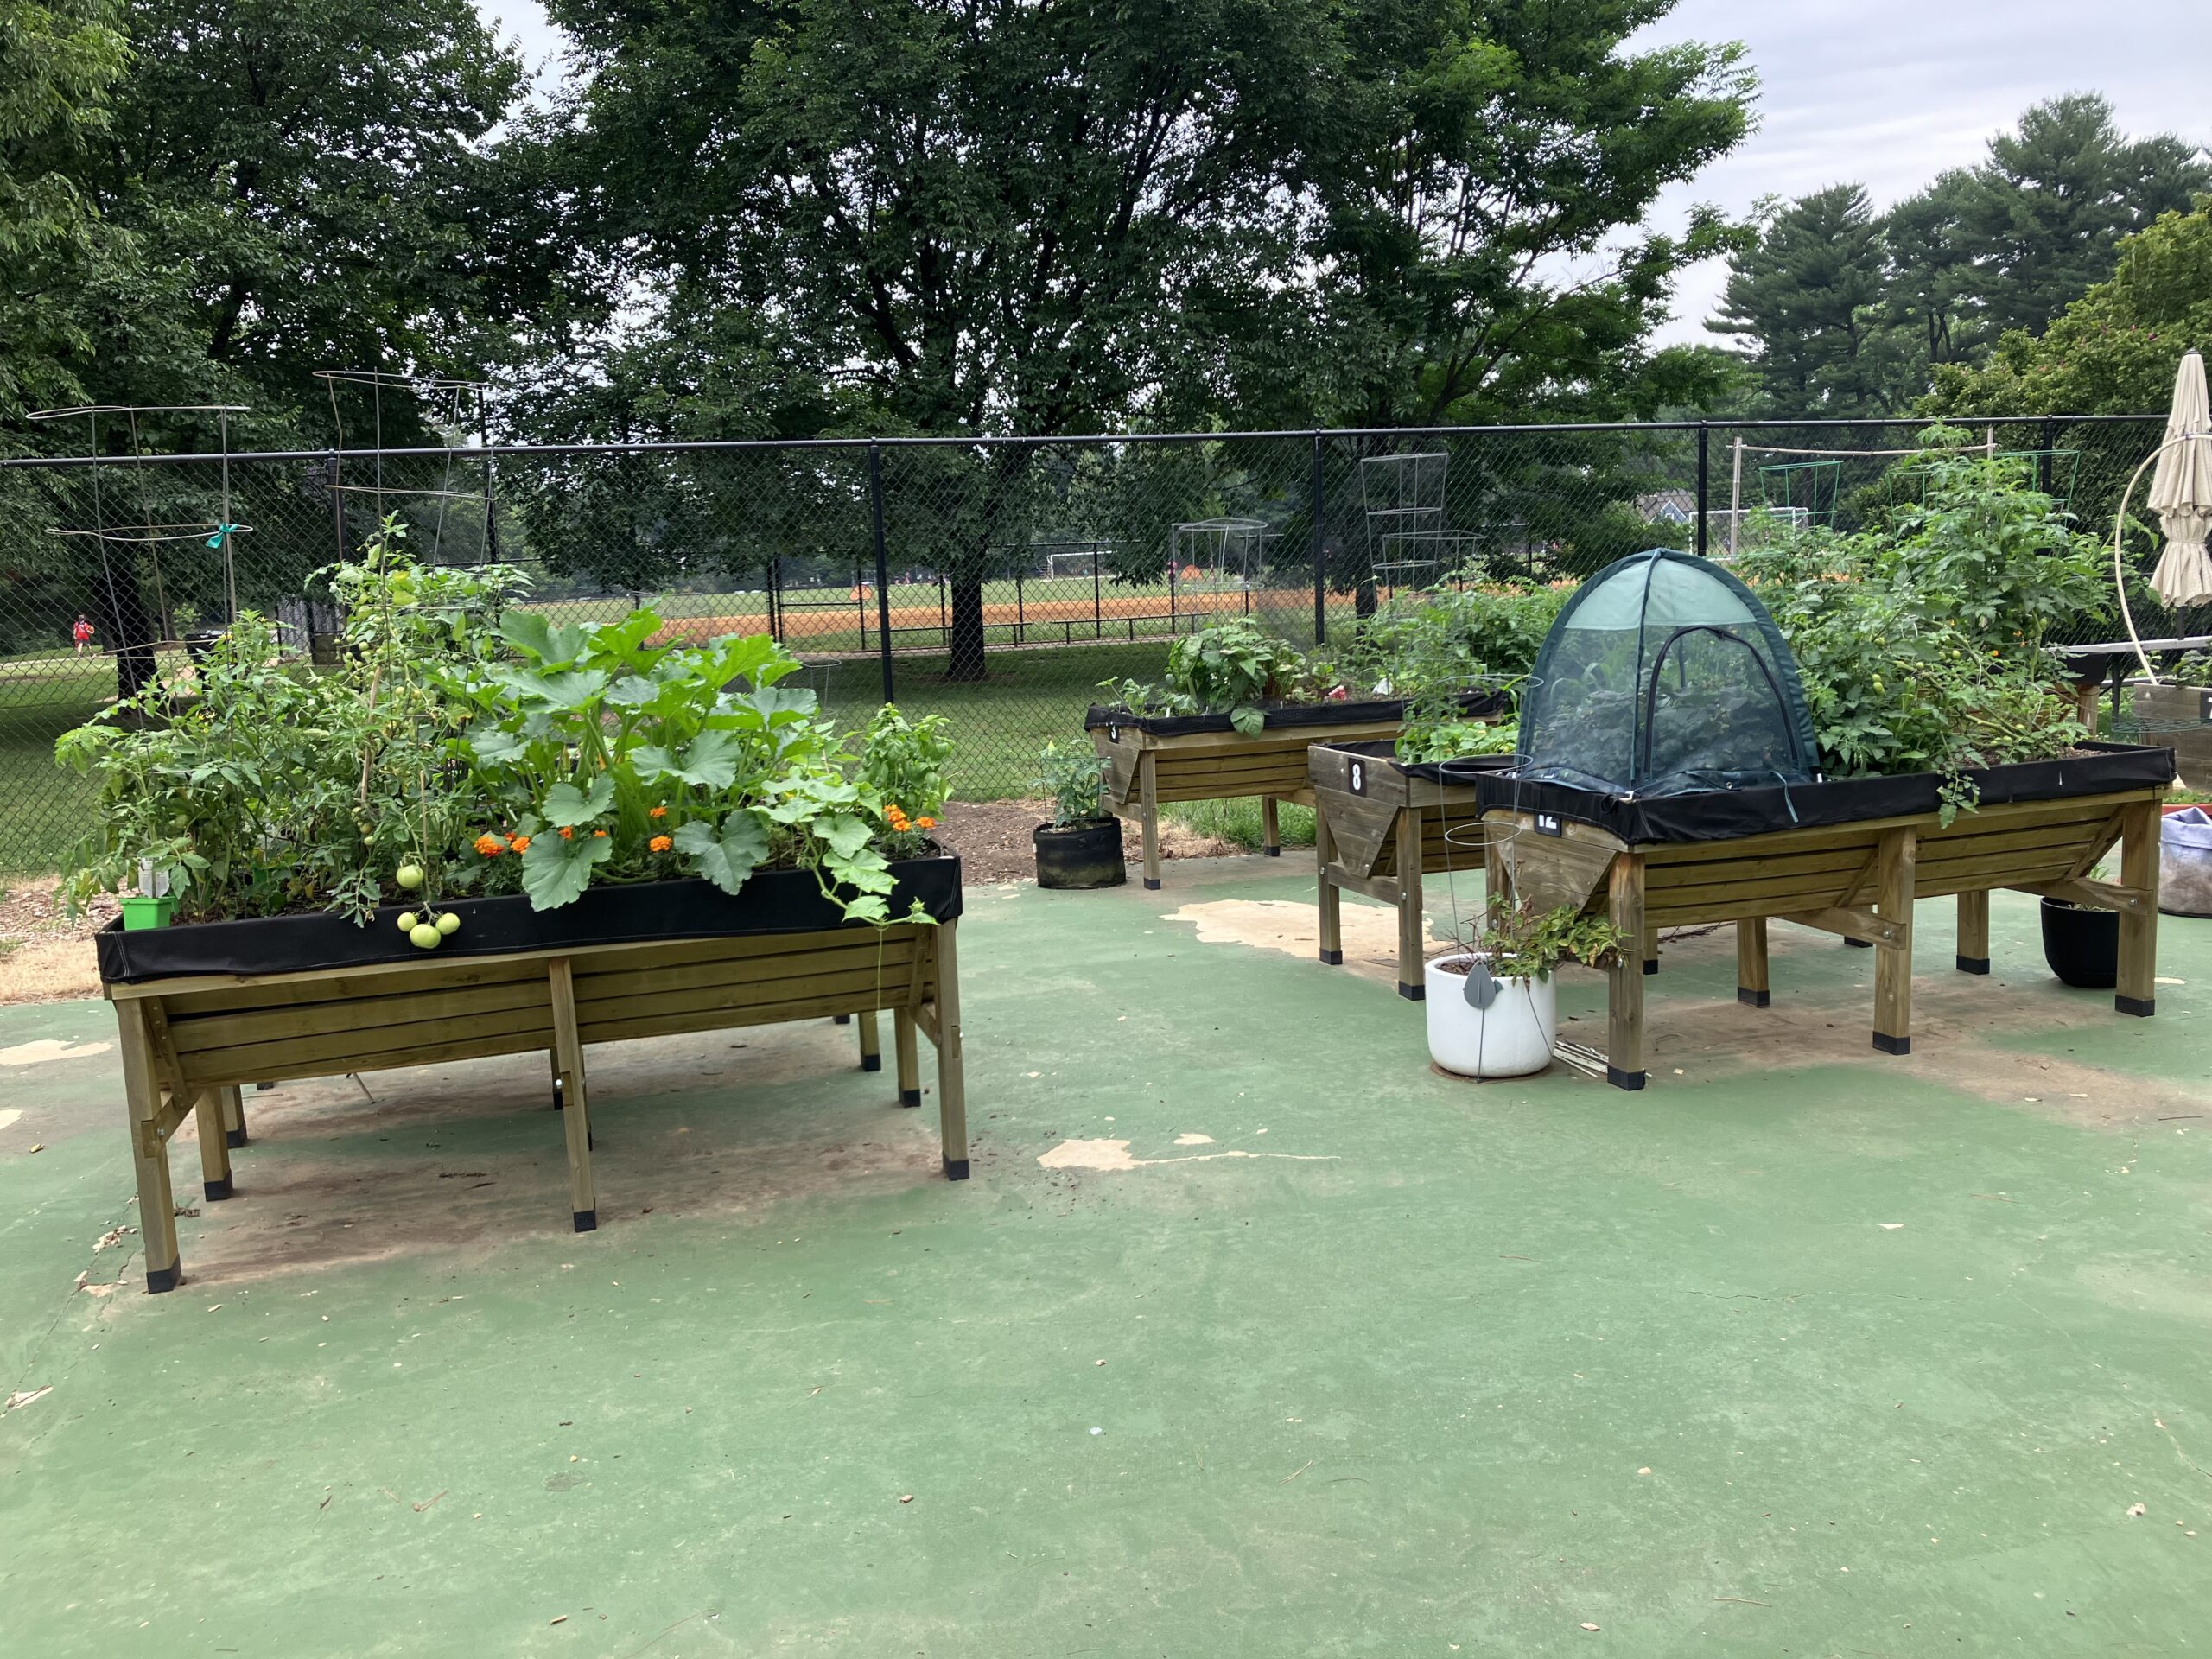 Accessible gardening tables at Nolte Community Garden